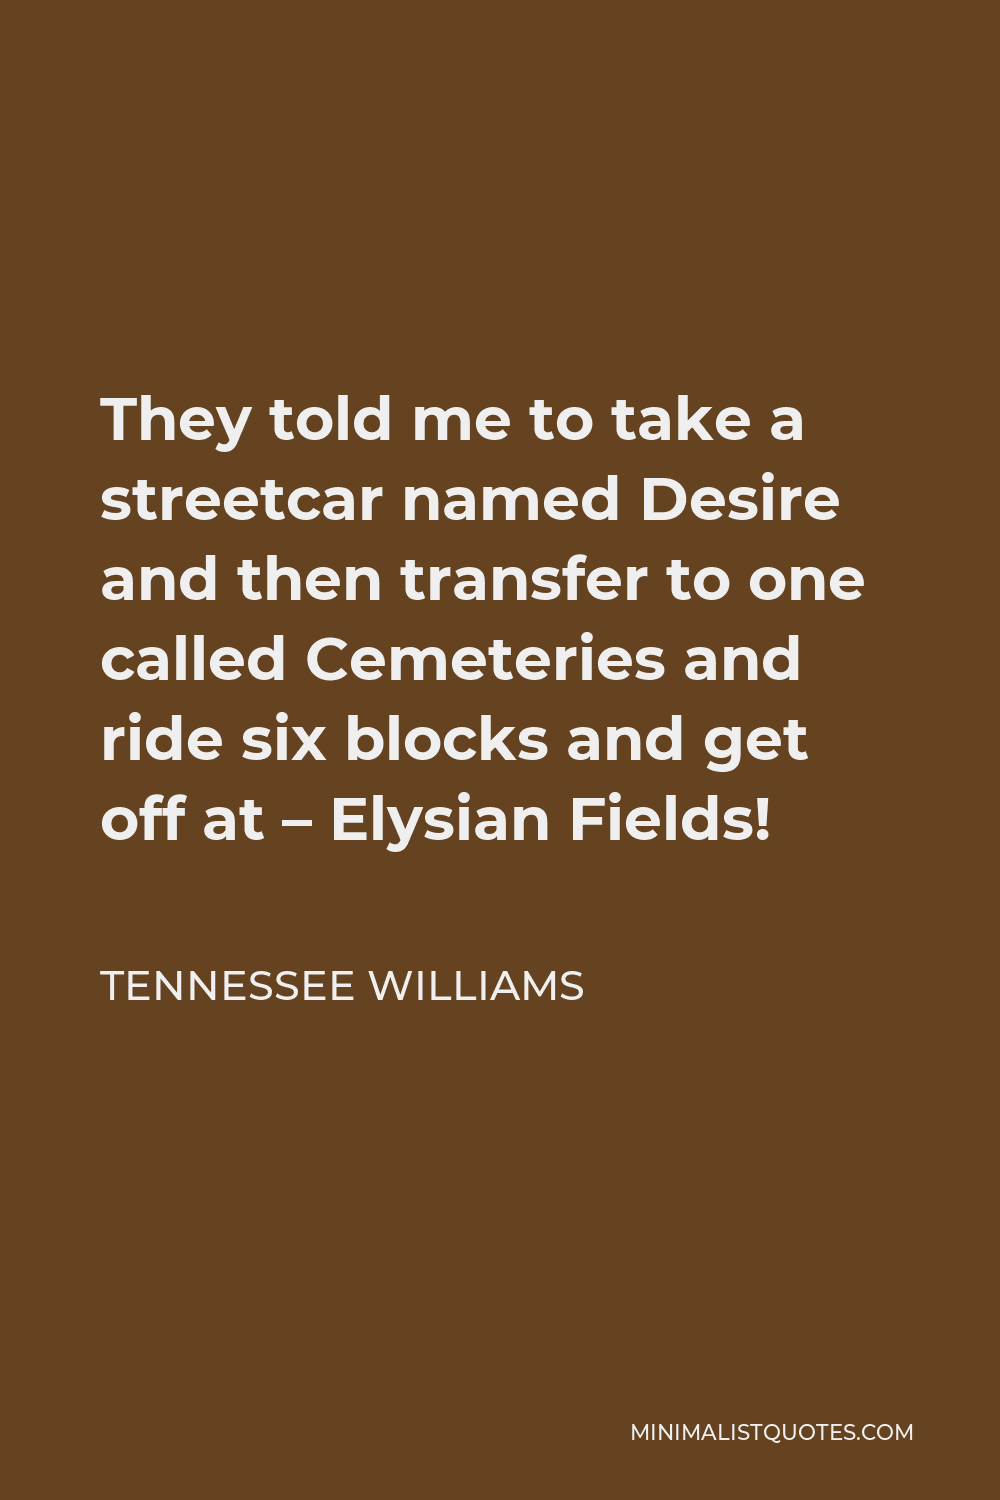 Tennessee Williams Quote - They told me to take a streetcar named Desire and then transfer to one called Cemeteries and ride six blocks and get off at – Elysian Fields!